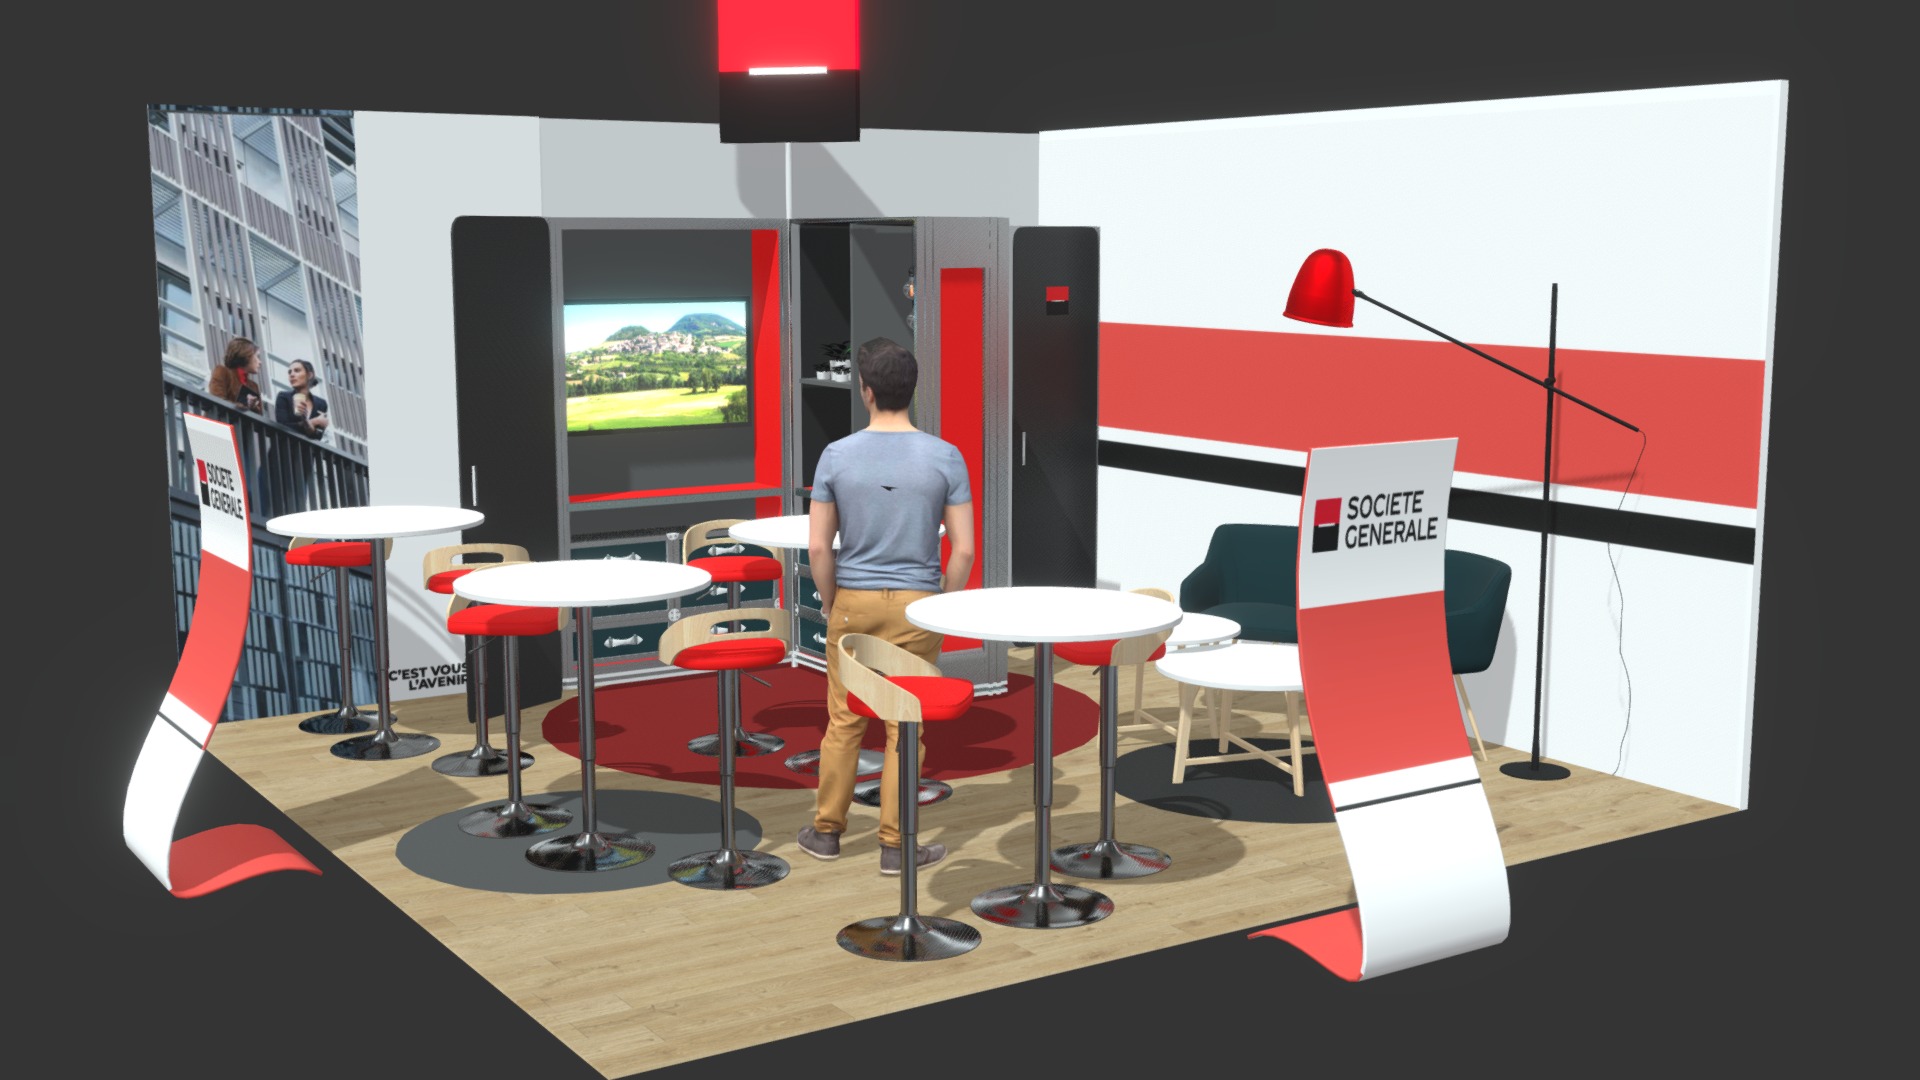 3D model Stand Société générale 25 m² - This is a 3D model of the Stand Société générale 25 m². The 3D model is about a person standing in a room with tables and chairs.